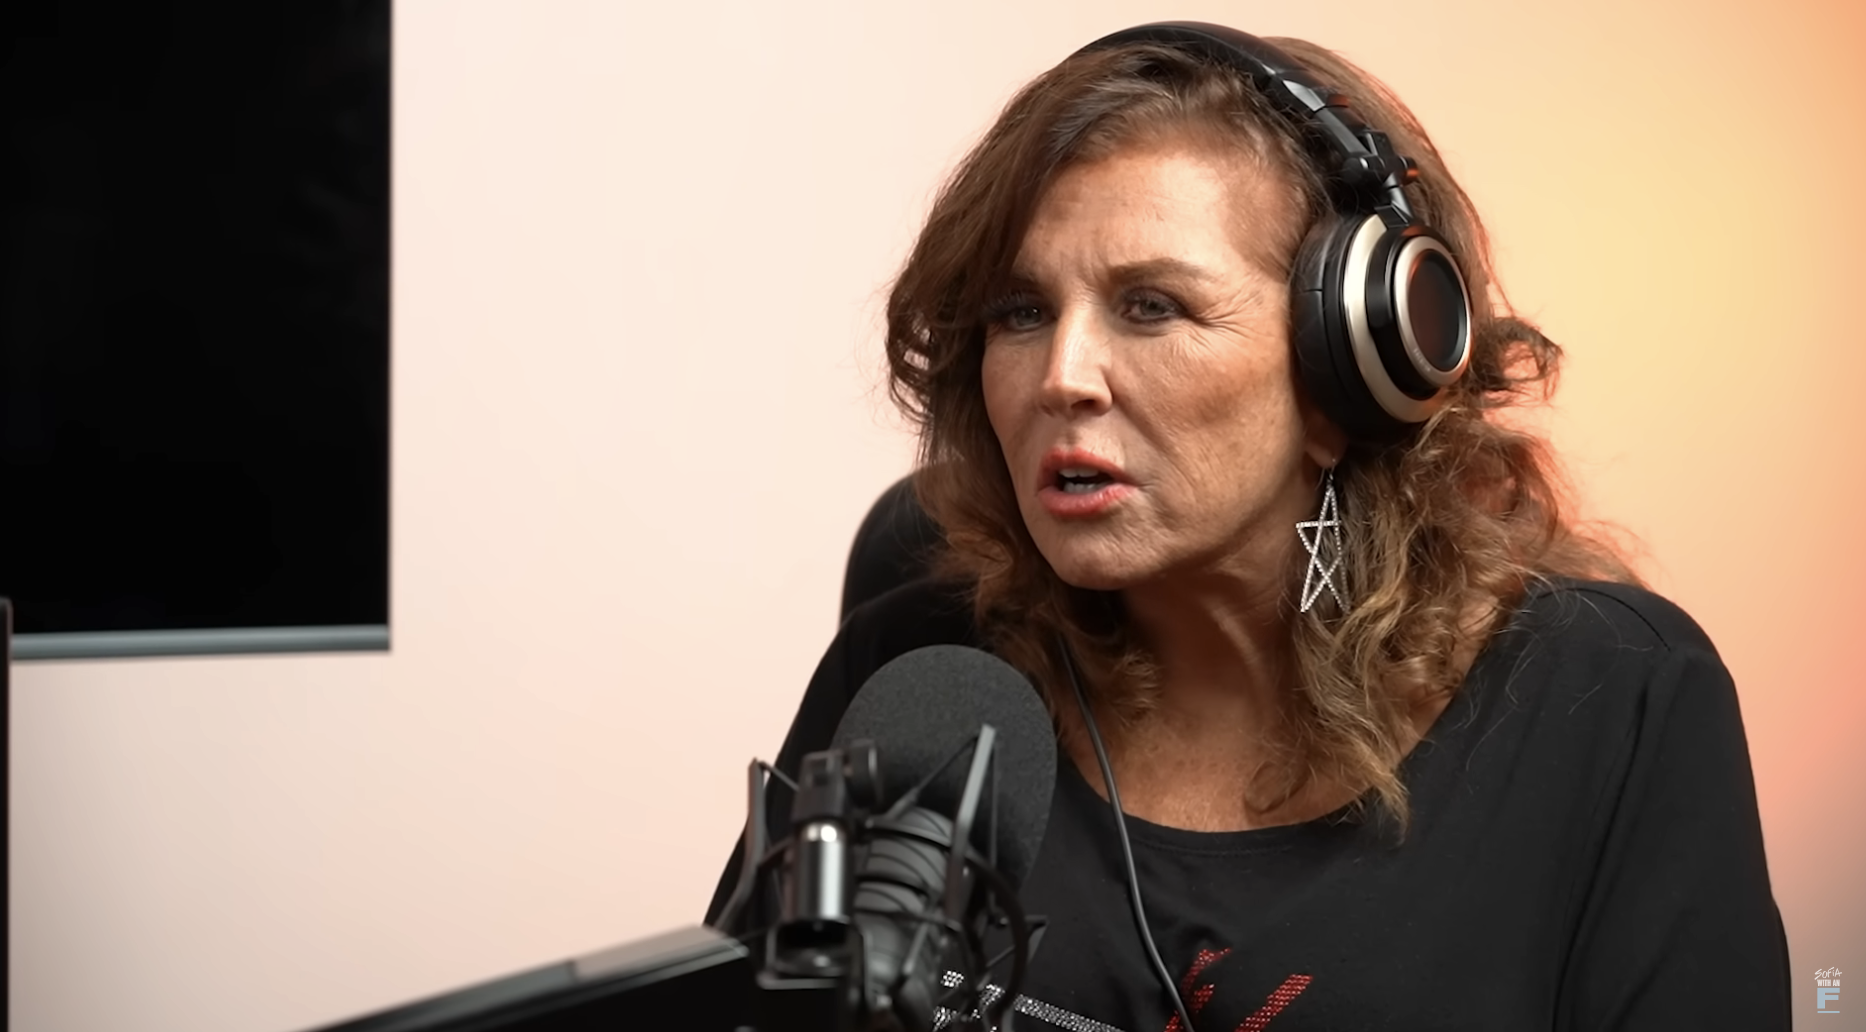 Abby seated and speaking into a microphone and wearing headphones